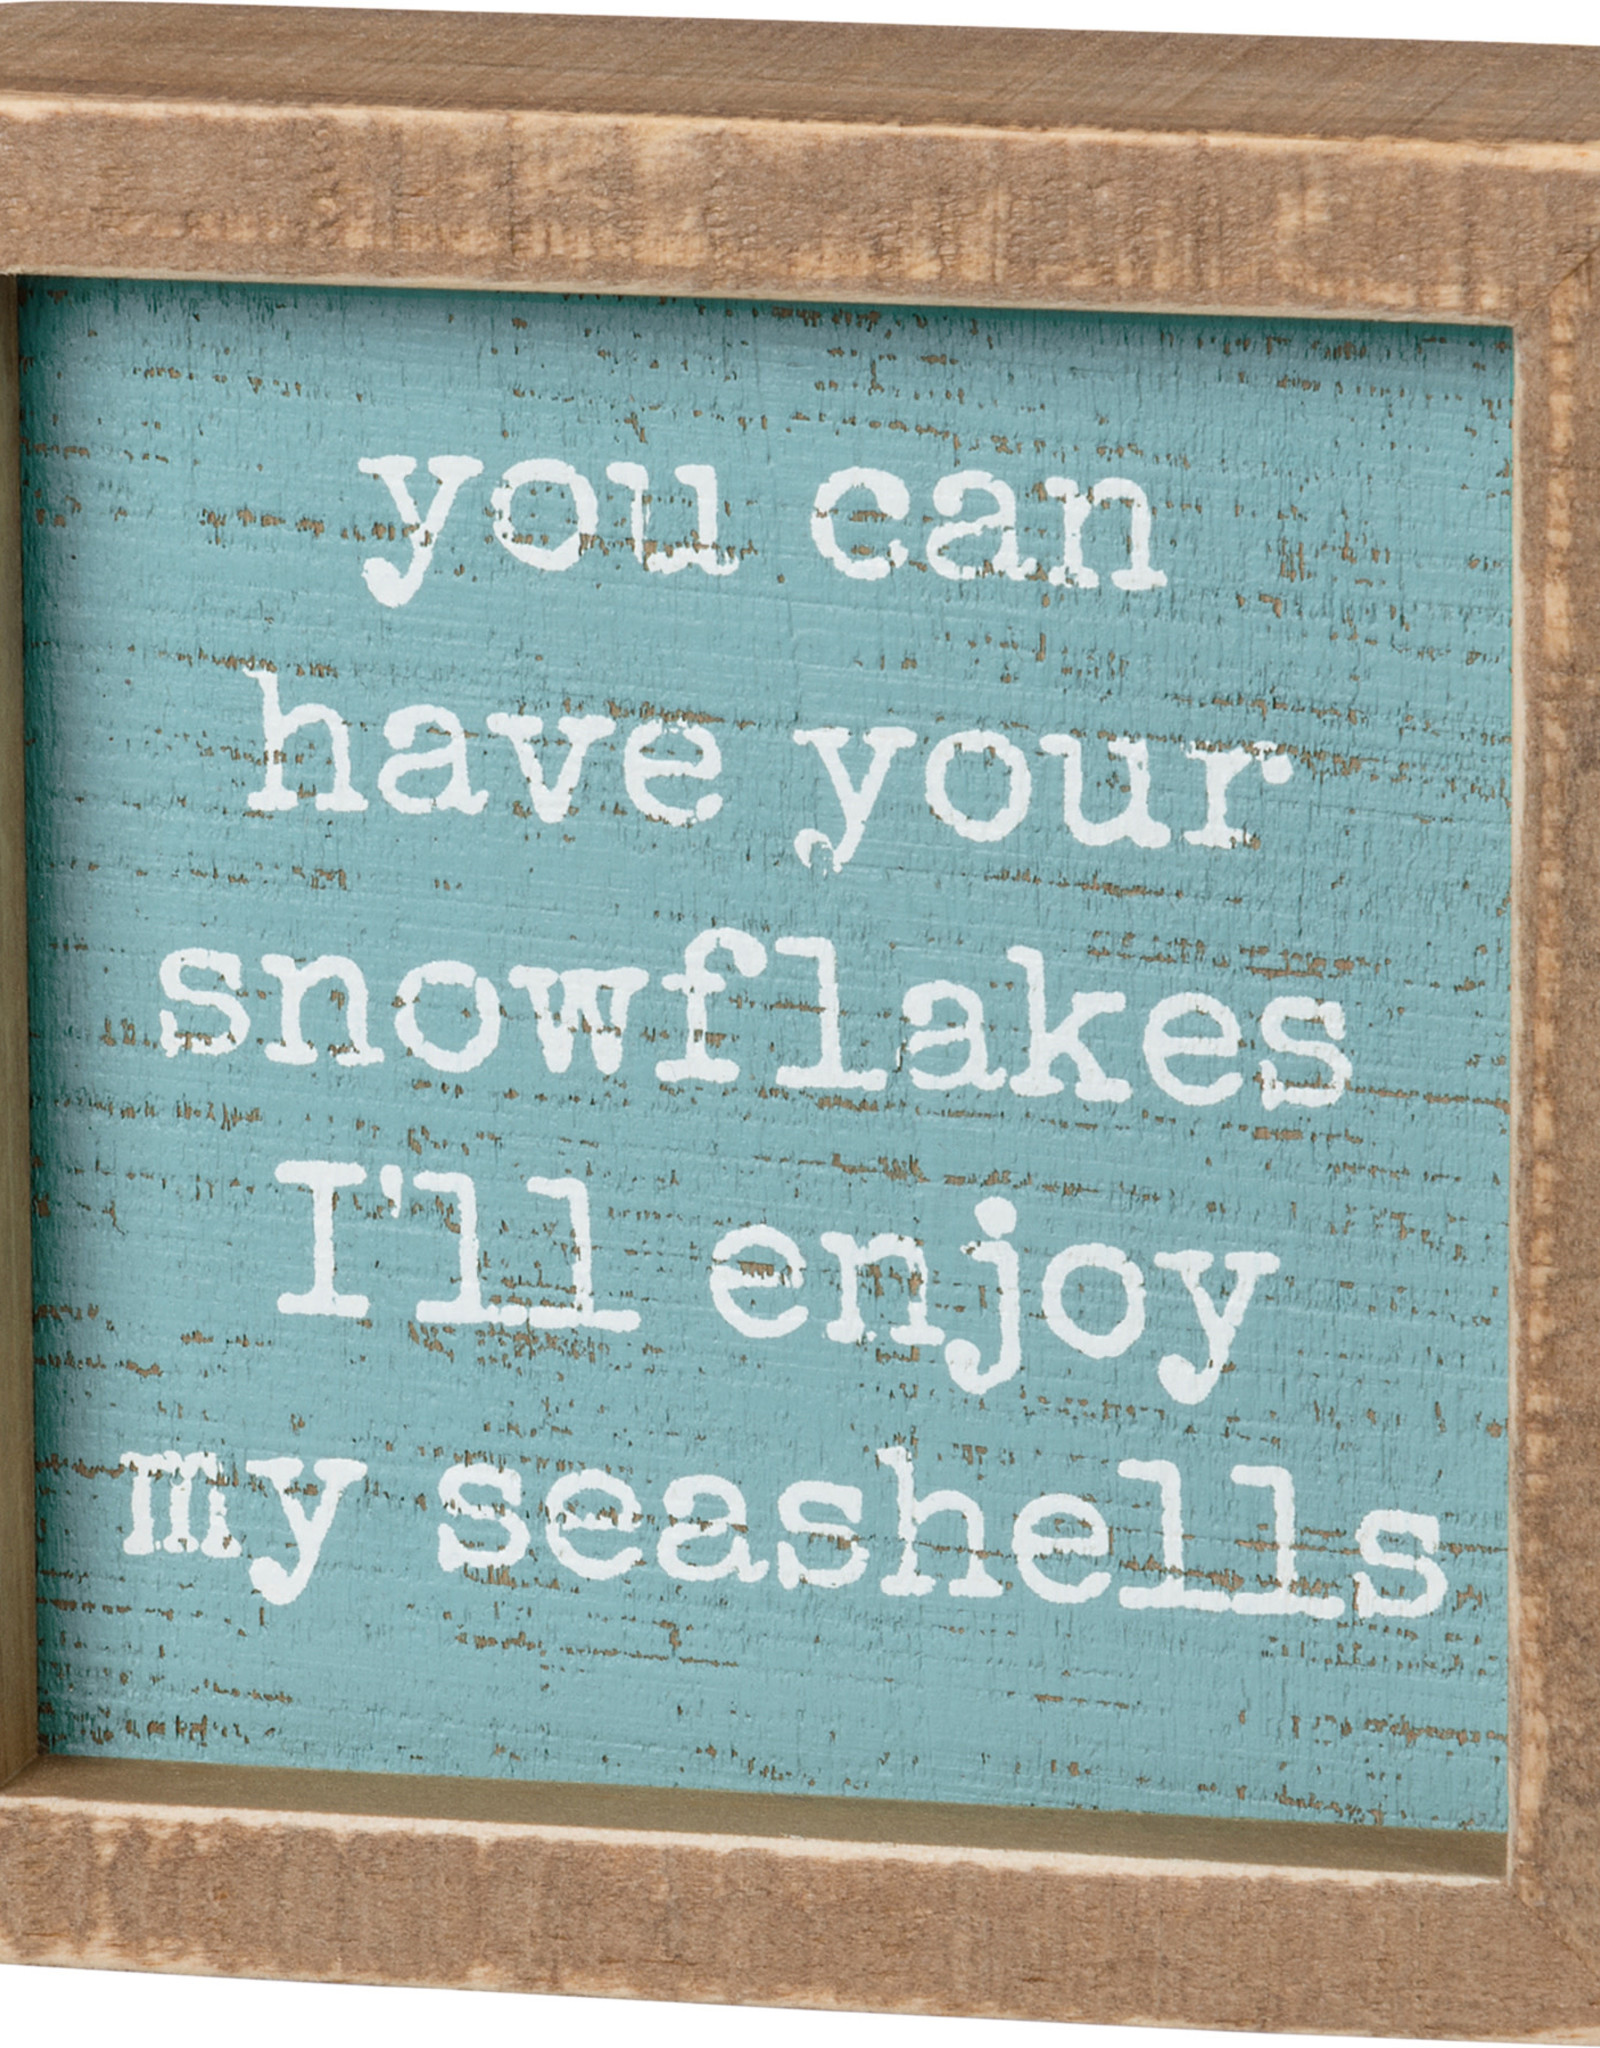 Inset Box Sign - You Can Have Your Snowflakes